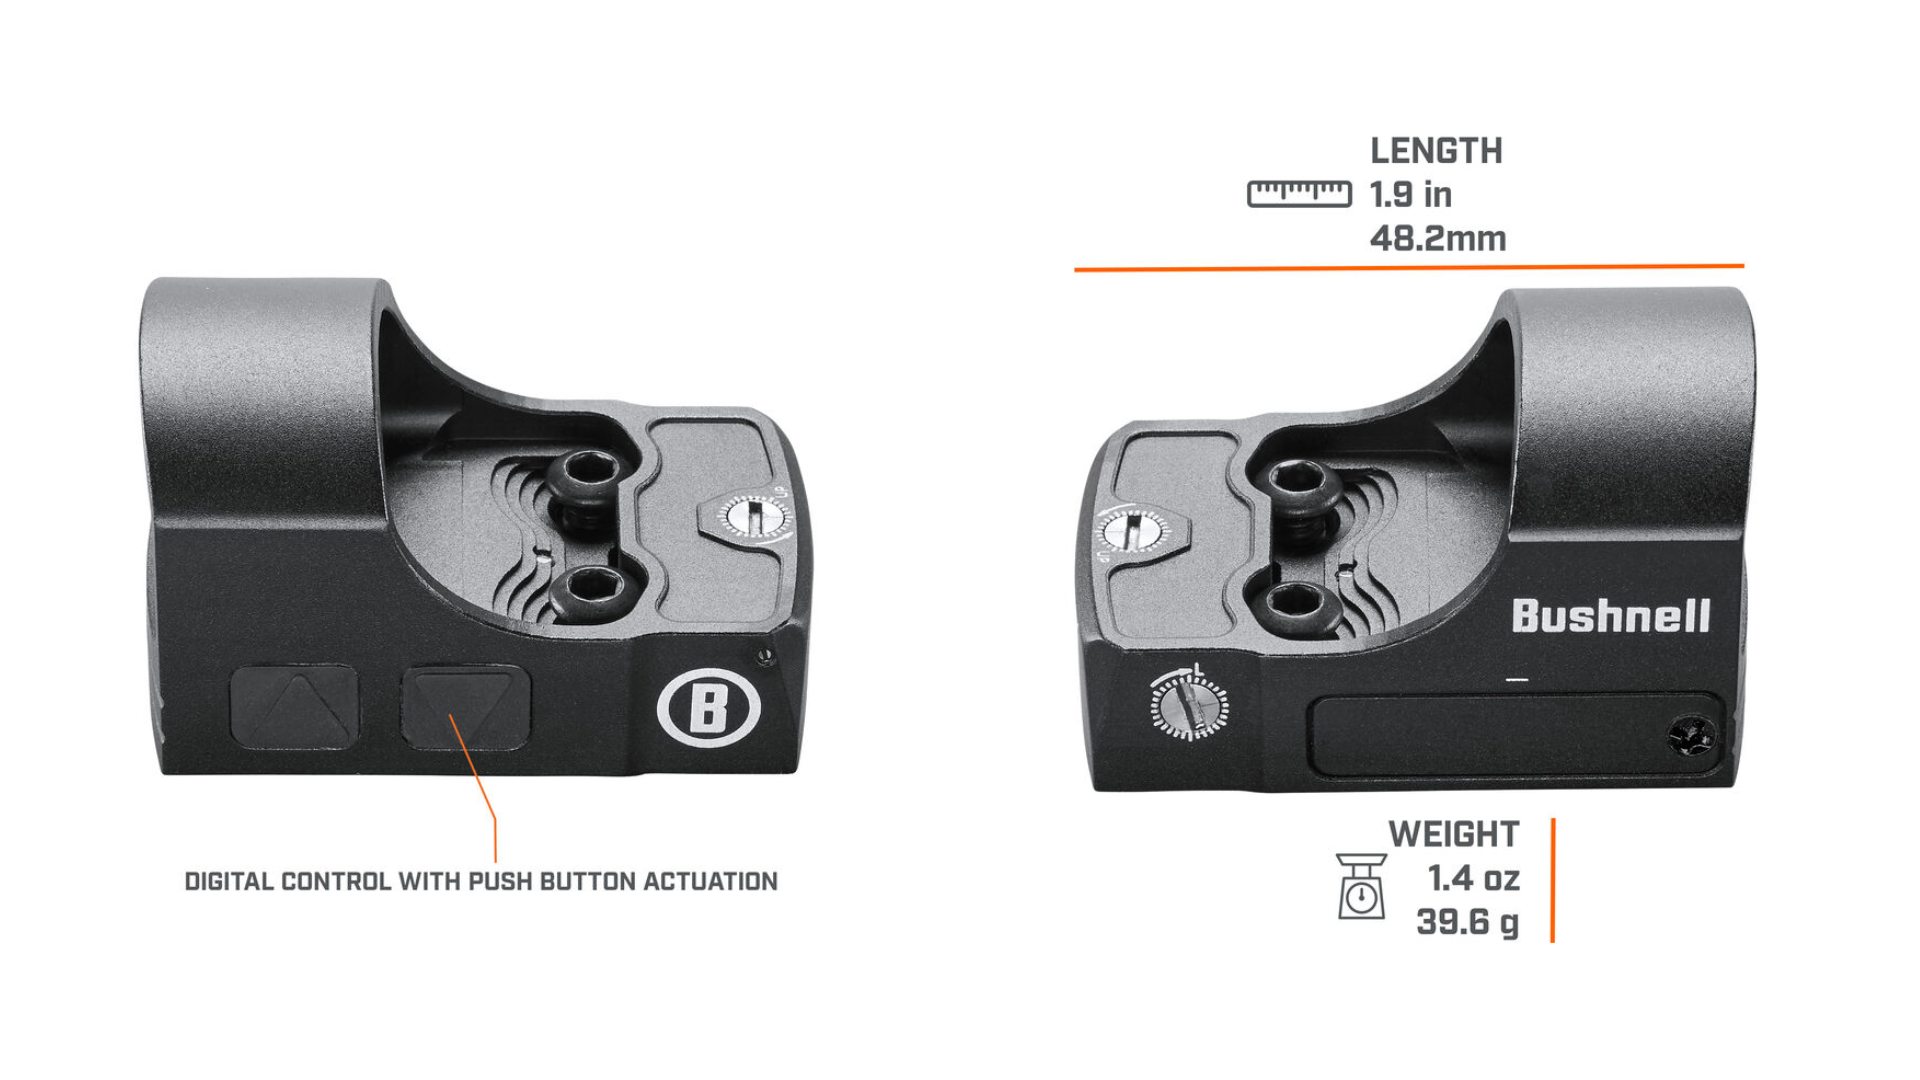 Bushnell RXS-100 reflex sight features